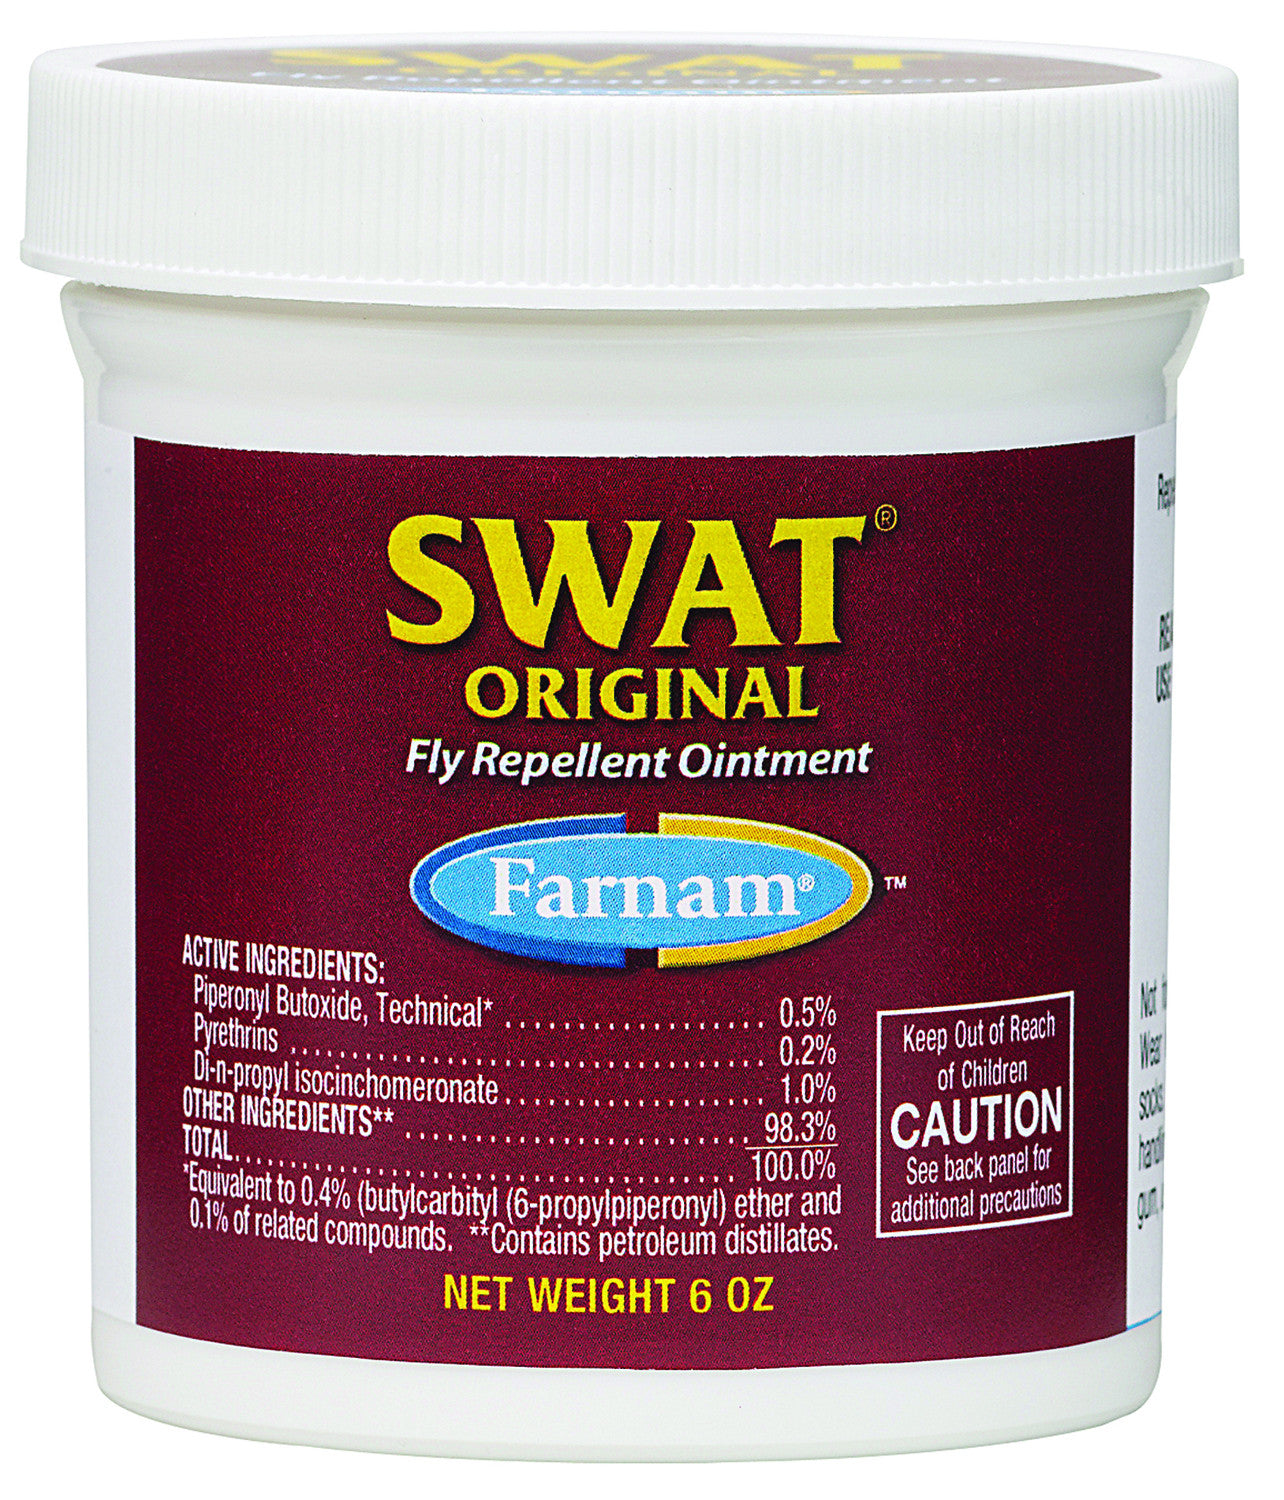 Swat Original Fly Repellent Ointment